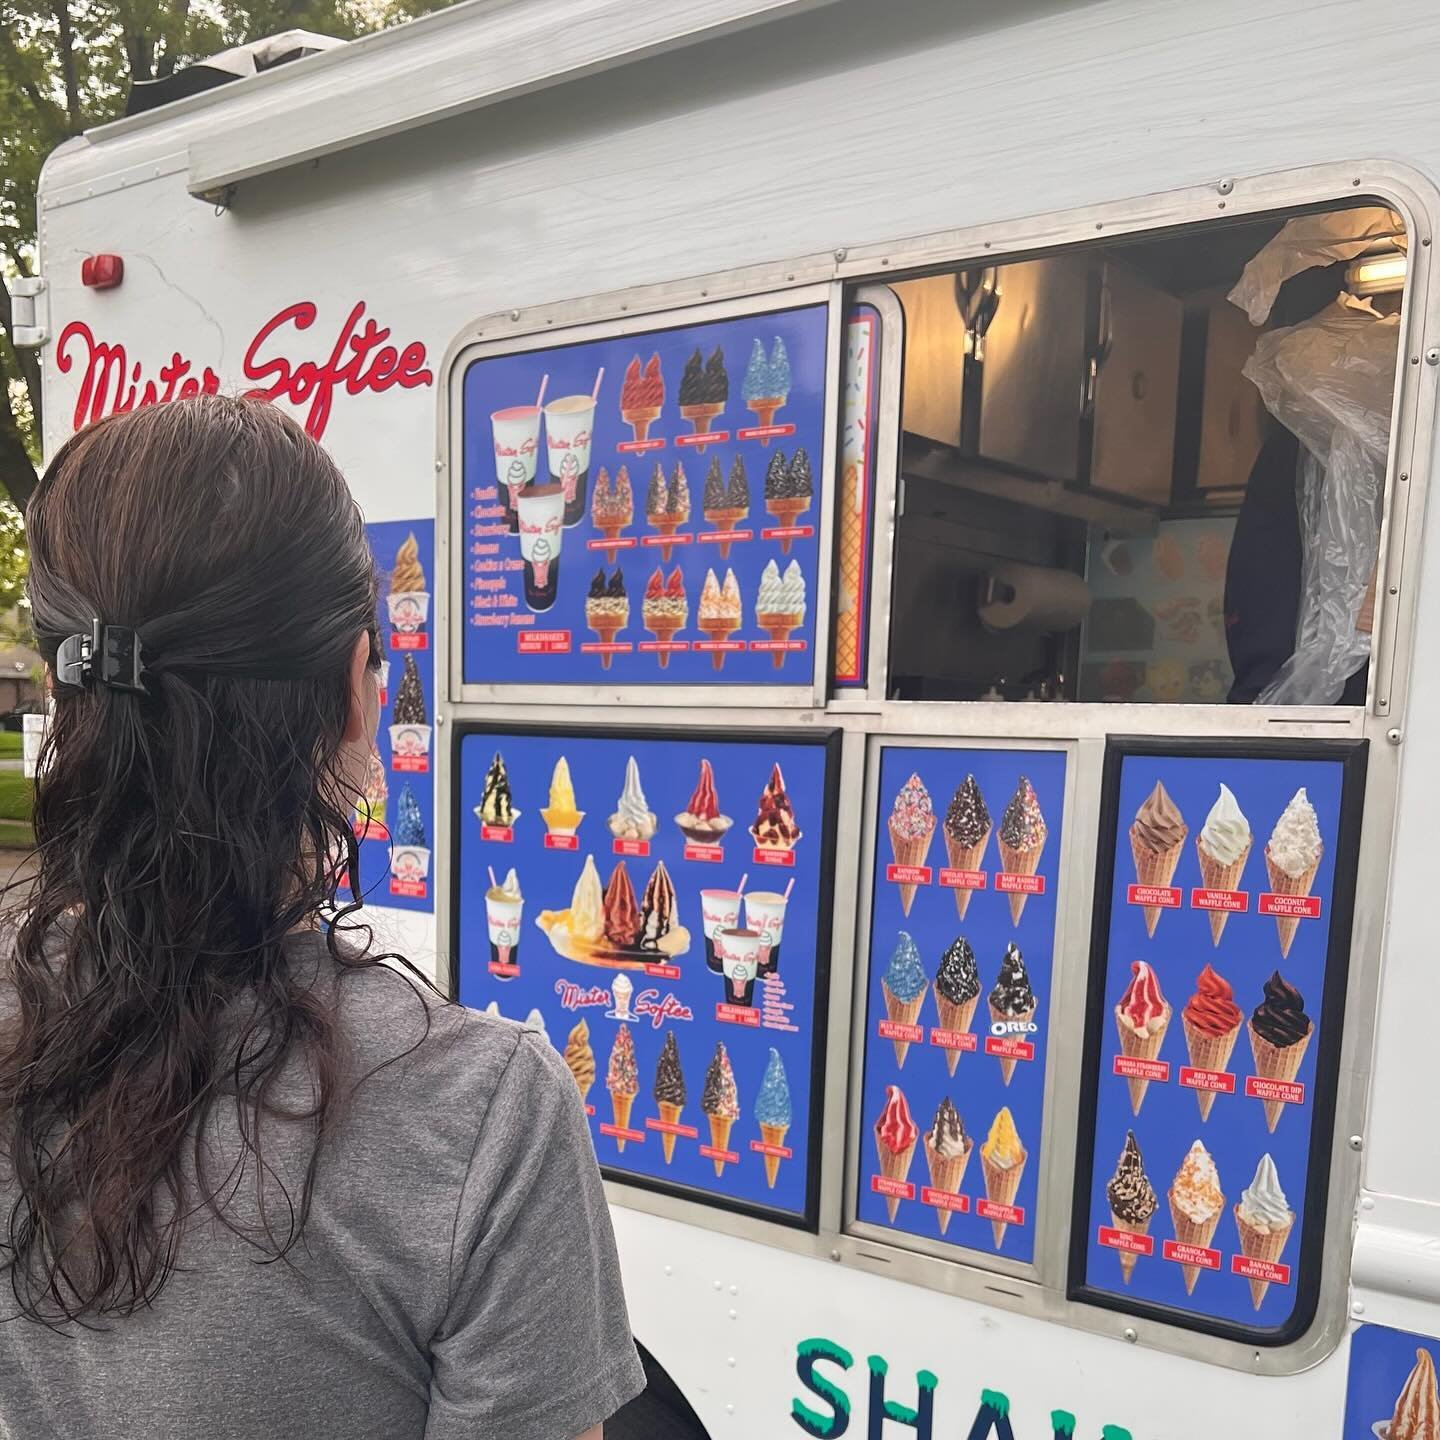 &ldquo;My love for ice cream emerged at an early age - and has never left!&rdquo; 

-Ginger Rogers

Today&rsquo;s mental health post is brought to you by self-care and Mister Softee. This is not a sponsored Mister Softee post, but I wouldn&rsquo;t mi